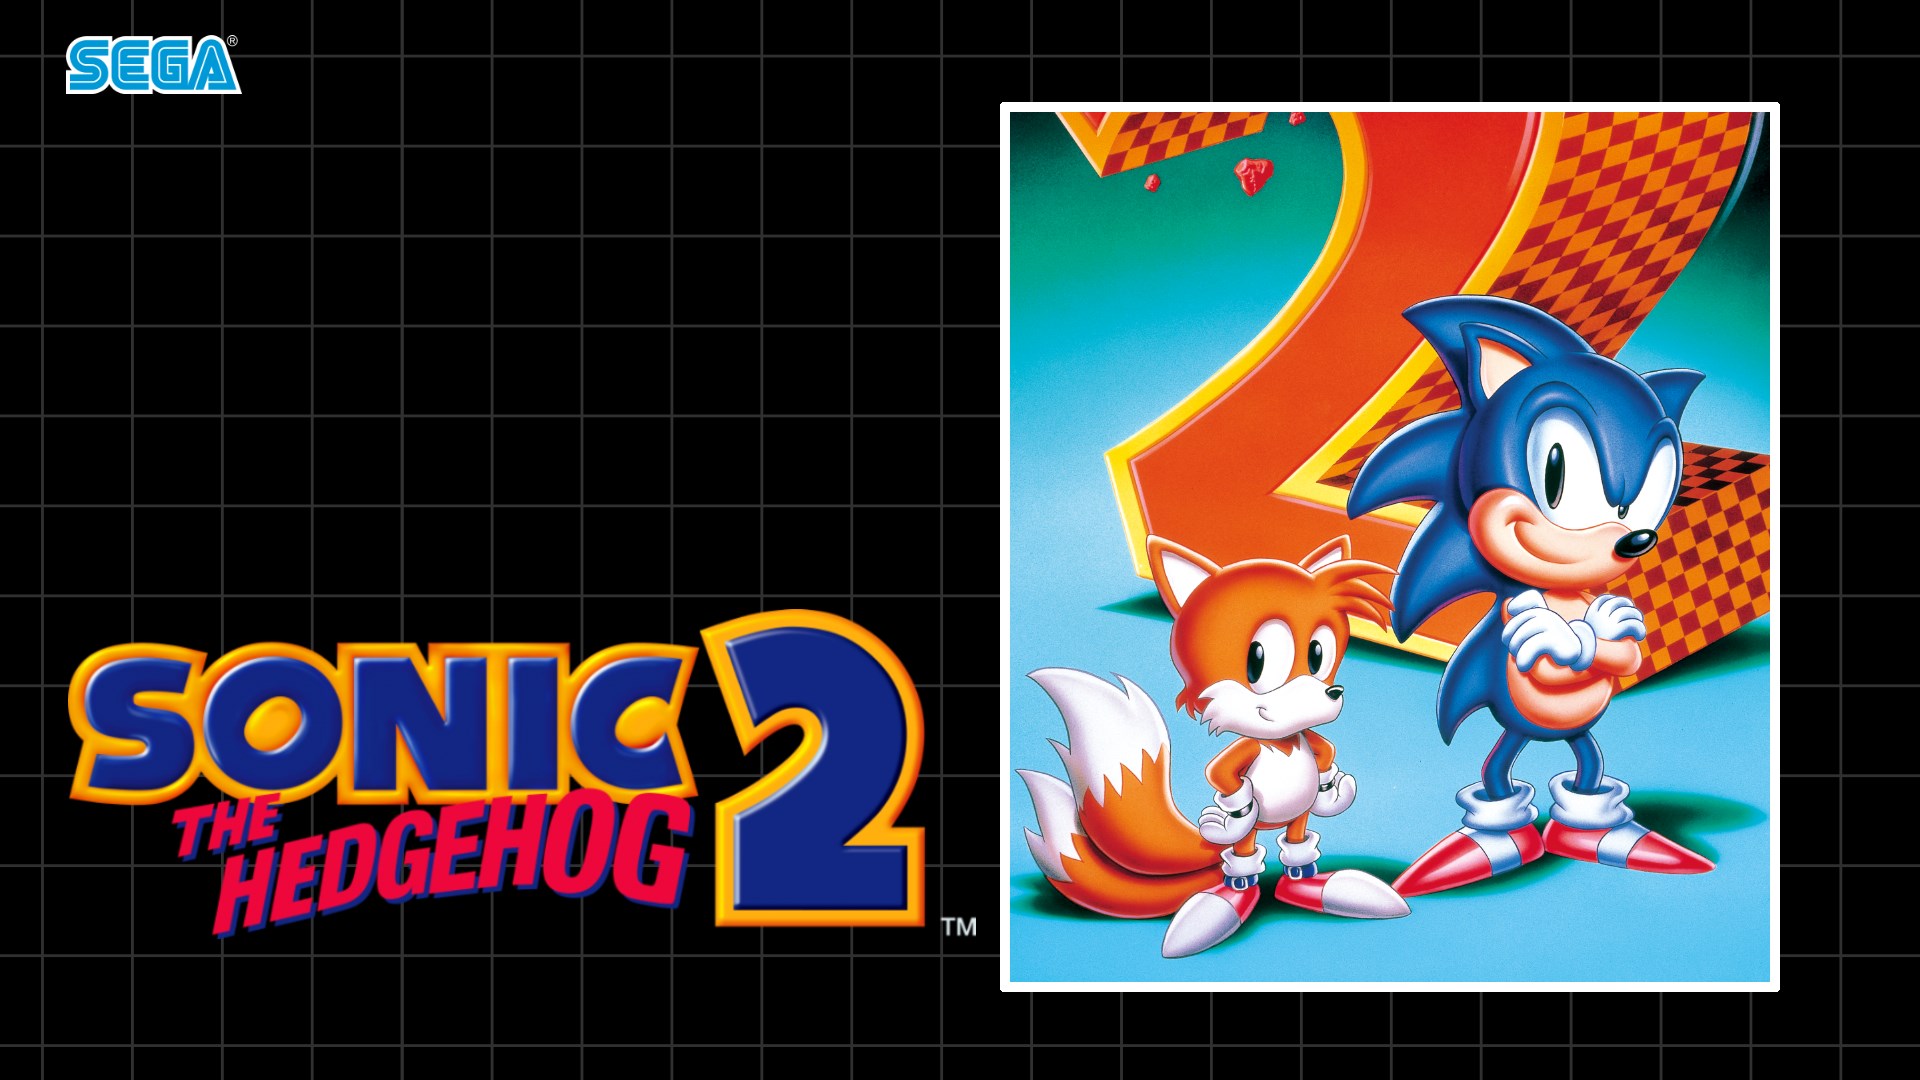 Sonic the Hedgehog & Tails